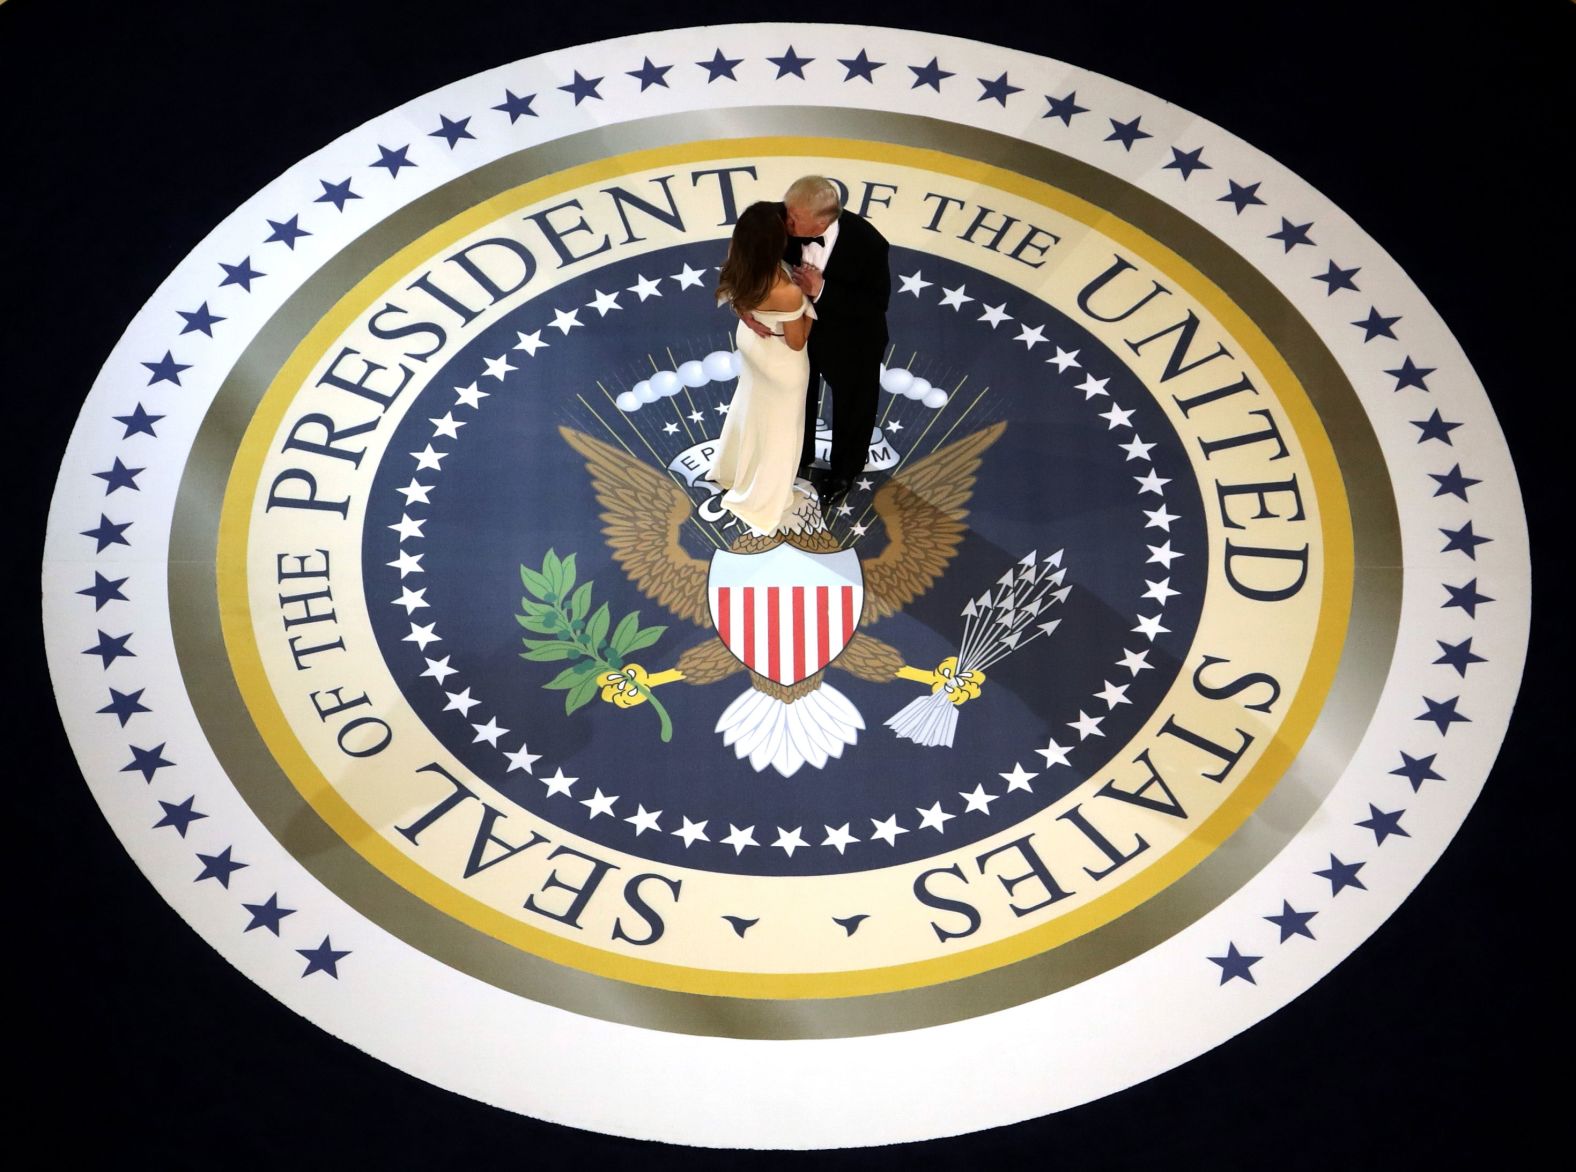 The new president kisses the first lady as they dance at one of <a href="index.php?page=&url=http%3A%2F%2Fwww.cnn.com%2F2017%2F01%2F20%2Fpolitics%2Fgallery%2F2017-inaugural-balls%2F" target="_blank">three inaugural balls.</a> The president, known for his affinity of over-the-top gold fixtures, <a href="index.php?page=&url=http%3A%2F%2Fwww.cnn.com%2F2017%2F01%2F20%2Fpolitics%2Finaugural-ball-melania-trump-fashion-2017%2F" target="_blank">went for classic Americana</a> with a touch of retro glitz.